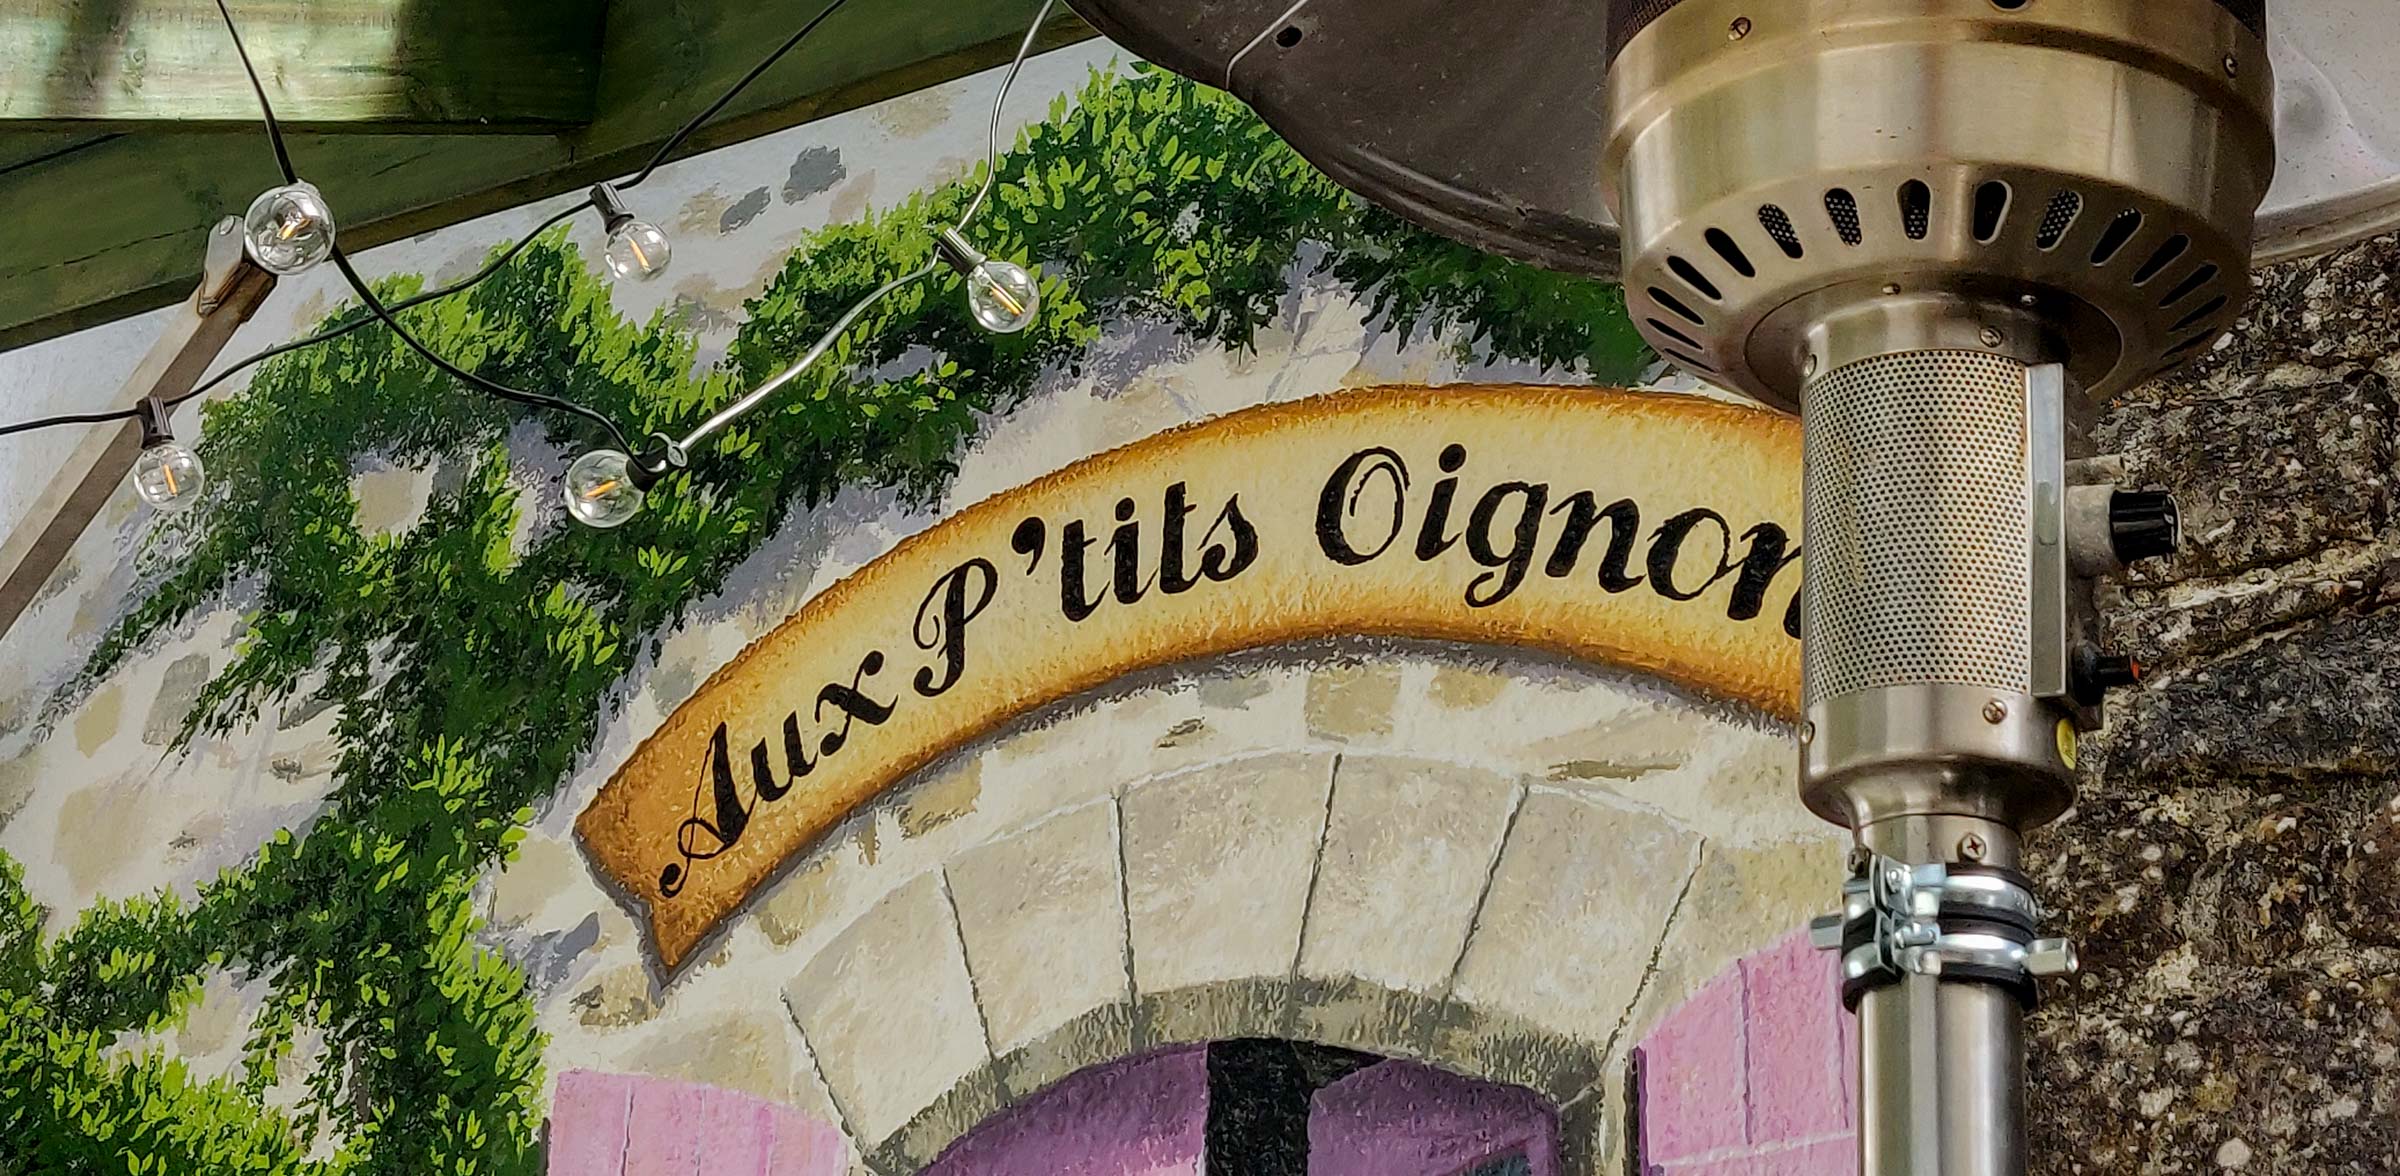 Hand-painted sign from a jaunty angle